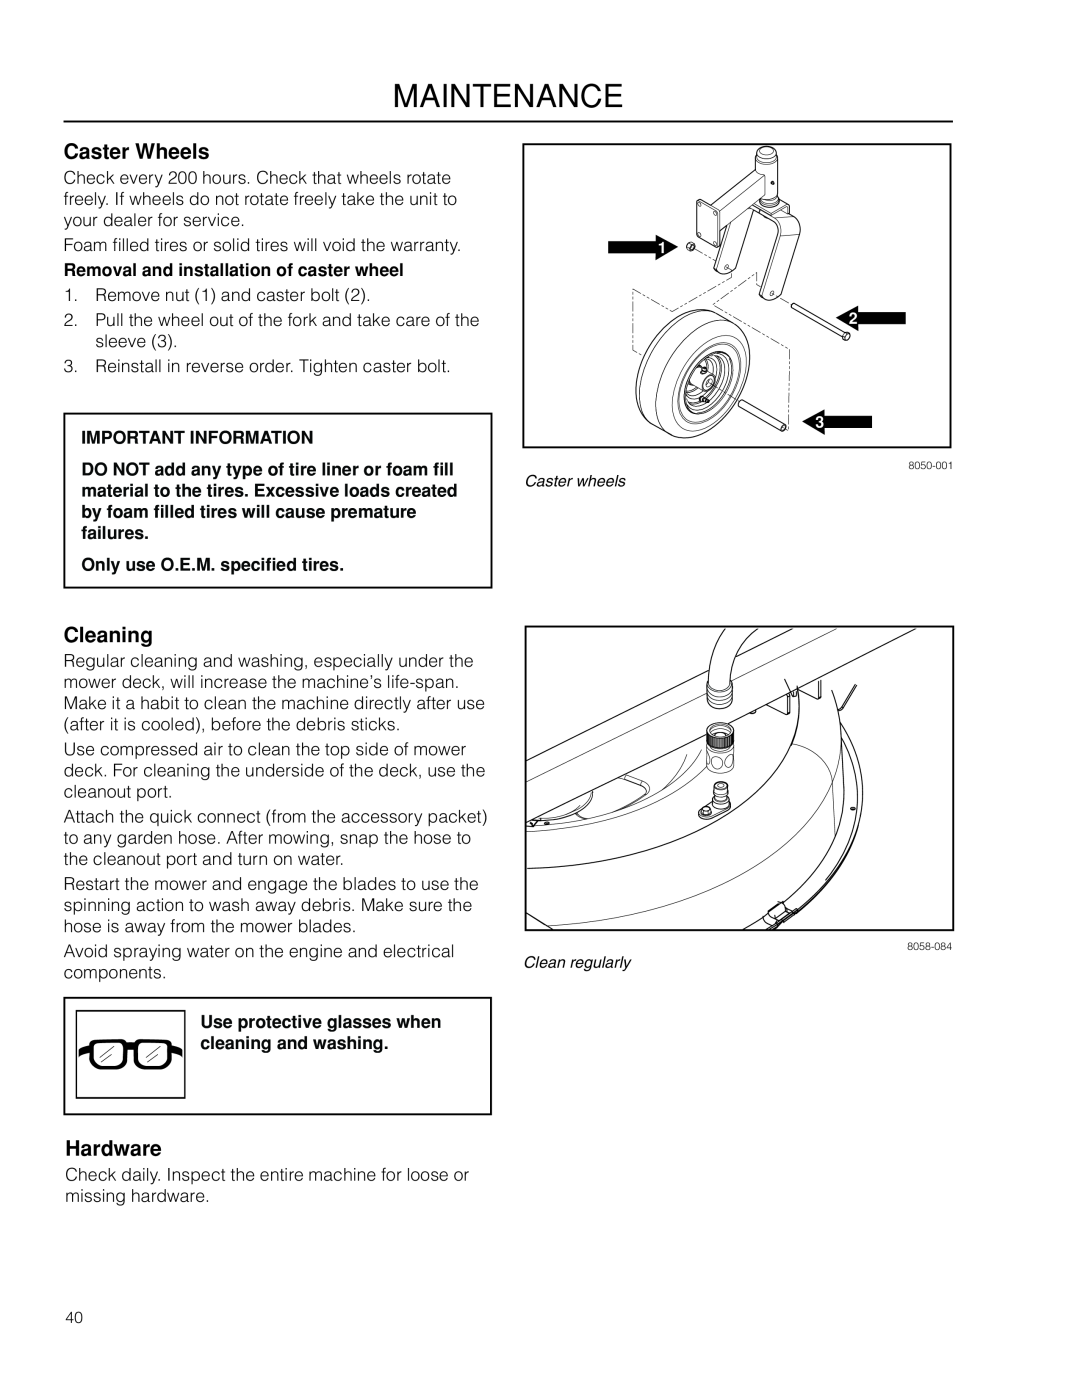 McCulloch ZM3016 BF, 966564001 Caster Wheels, Cleaning, Hardware, Removal and installation of caster wheel, Maintenance 